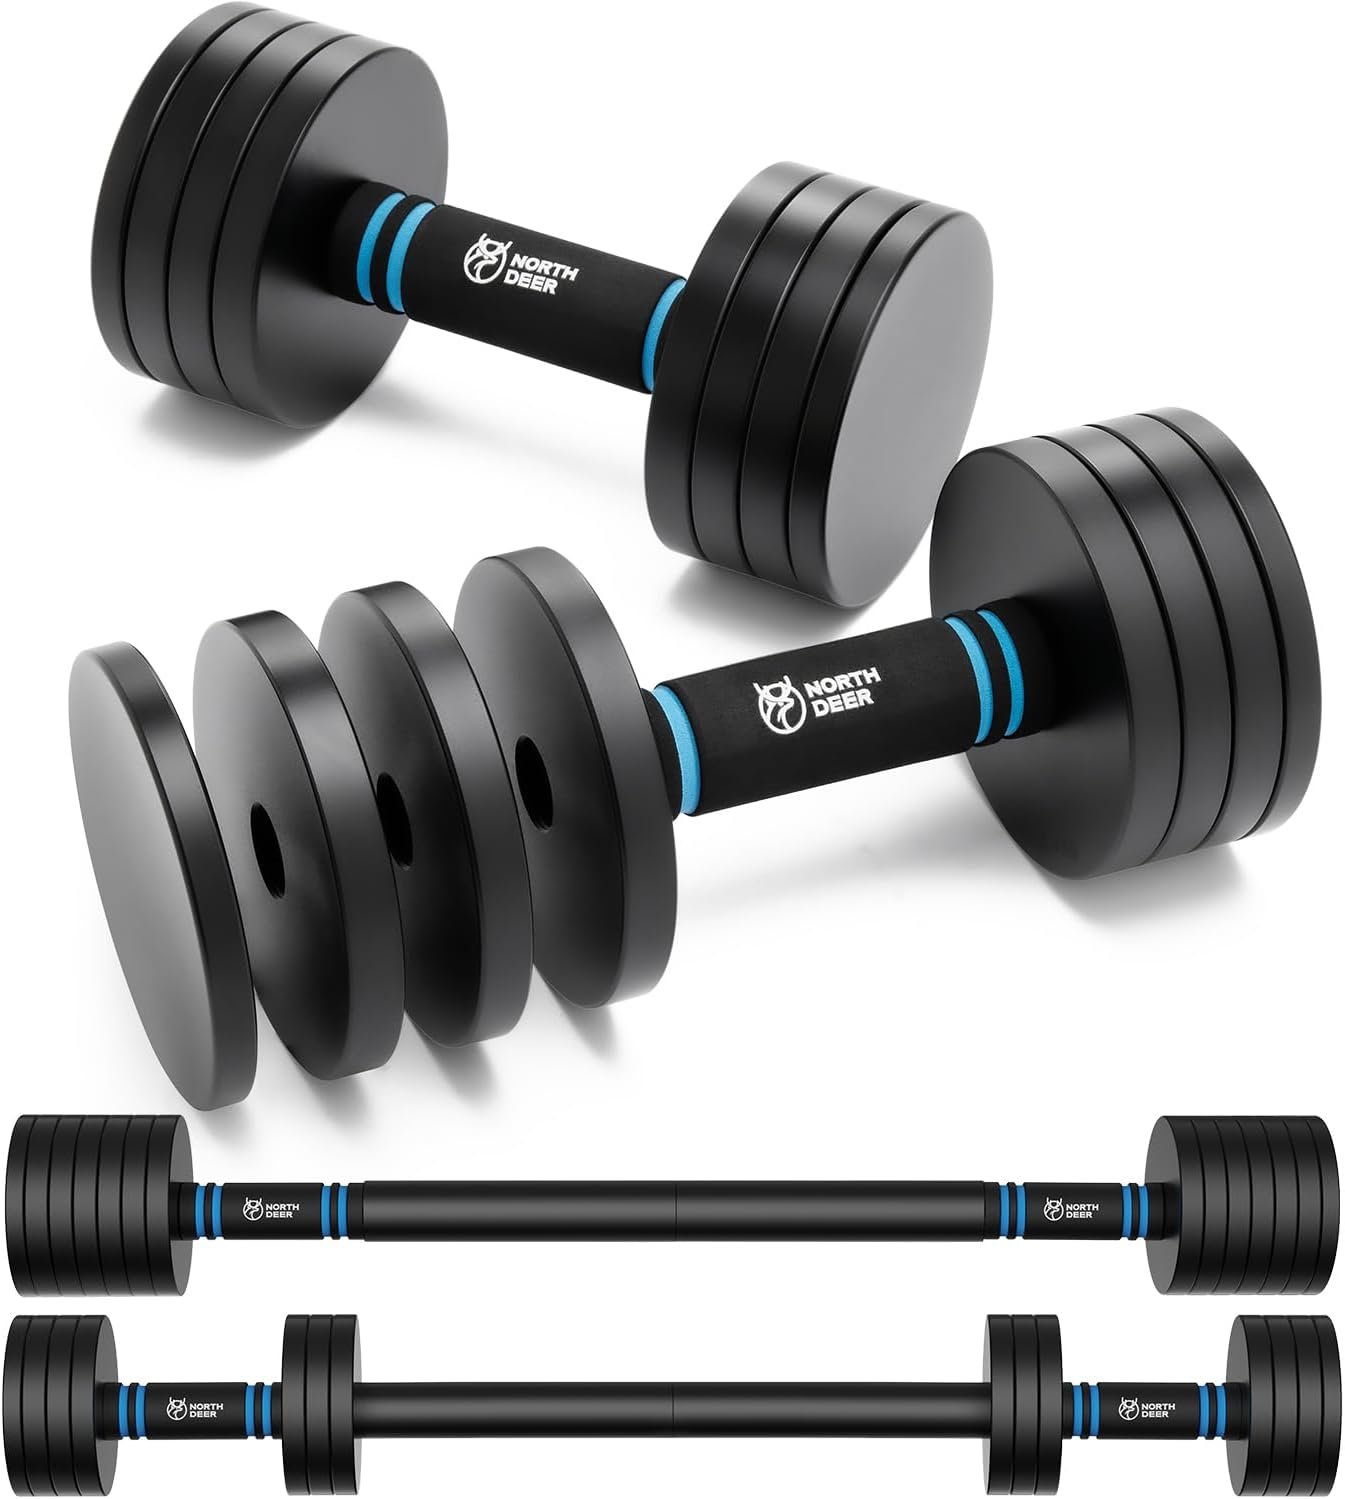 Northdeer 2.0 Upgraded Adjustable Steel Dumbbells, 40/60Lbs Free Weight Set with Connector, 2 in 1 Dumbbell Barbell Set, Home Gym Workout for Men and Women, Compatible with Version 1.0 Dumbbell Set